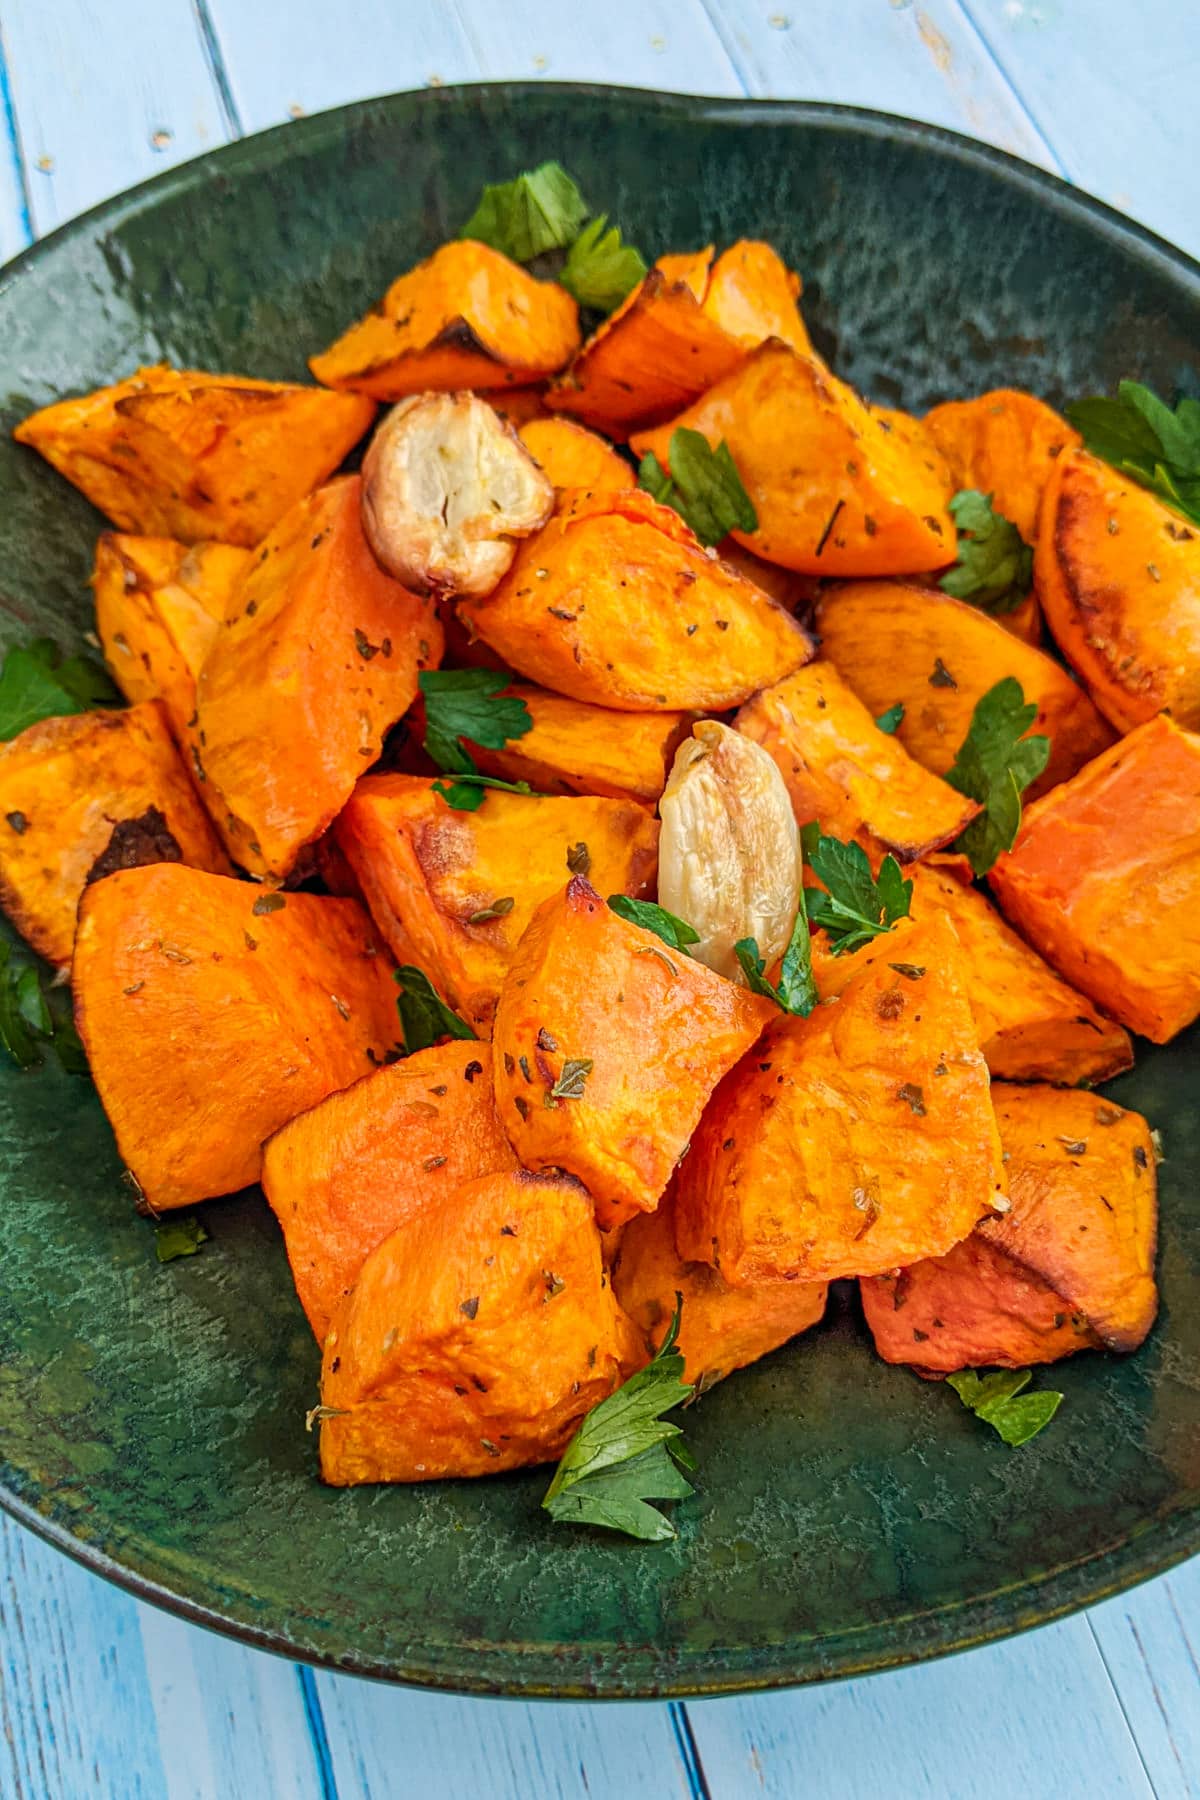 A plate with sweet potato bites with garlic and parsley.